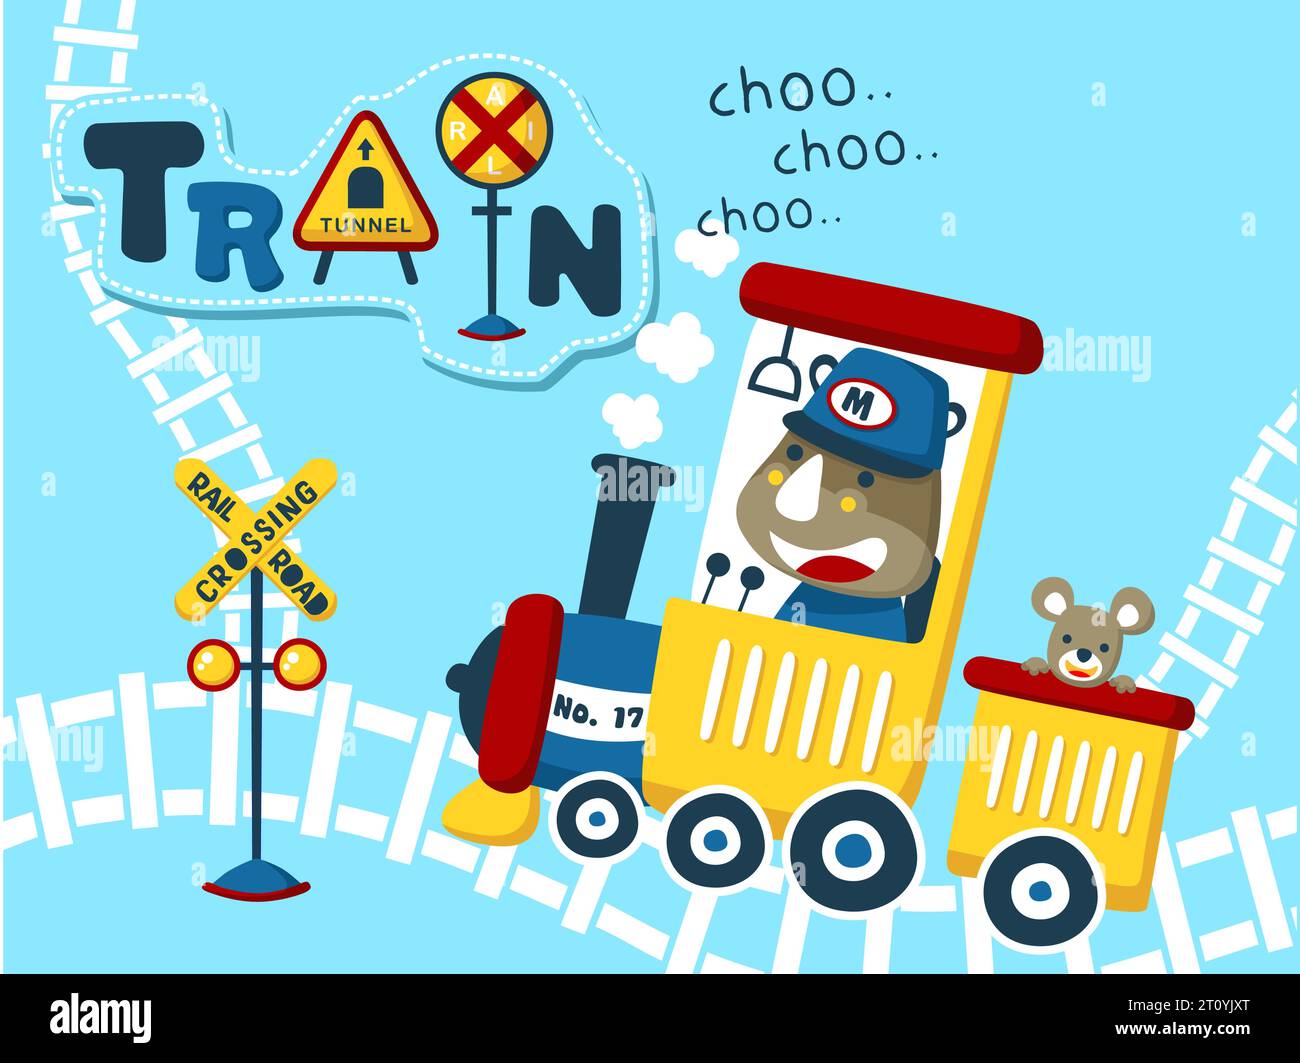 Cartoon vector of cute rhino with mouse on steam train, railway elements illustration Stock Vector